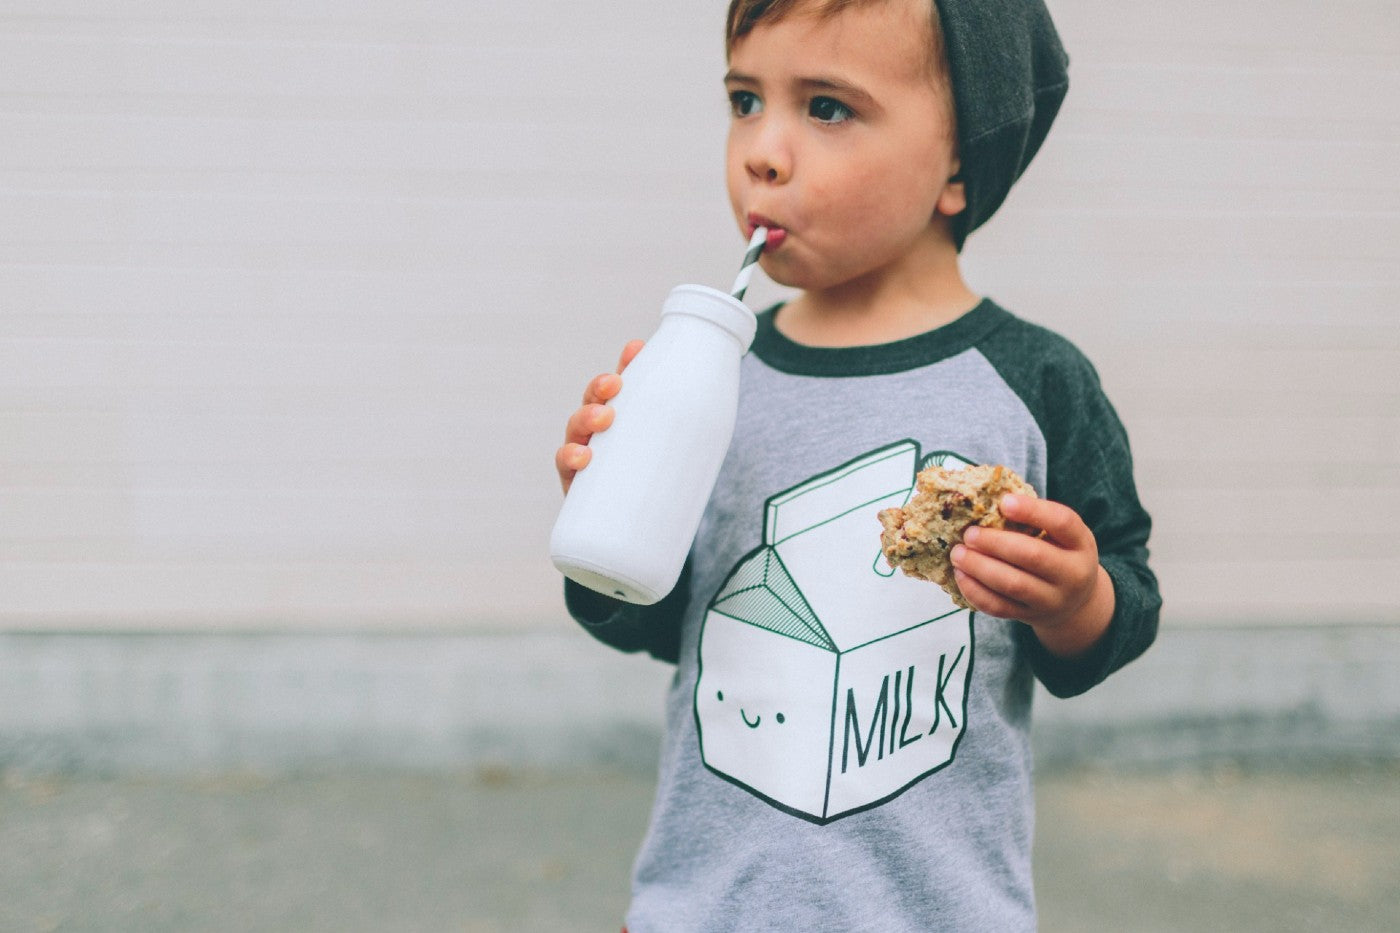 Children should stick to drinking 'milk and water' according to